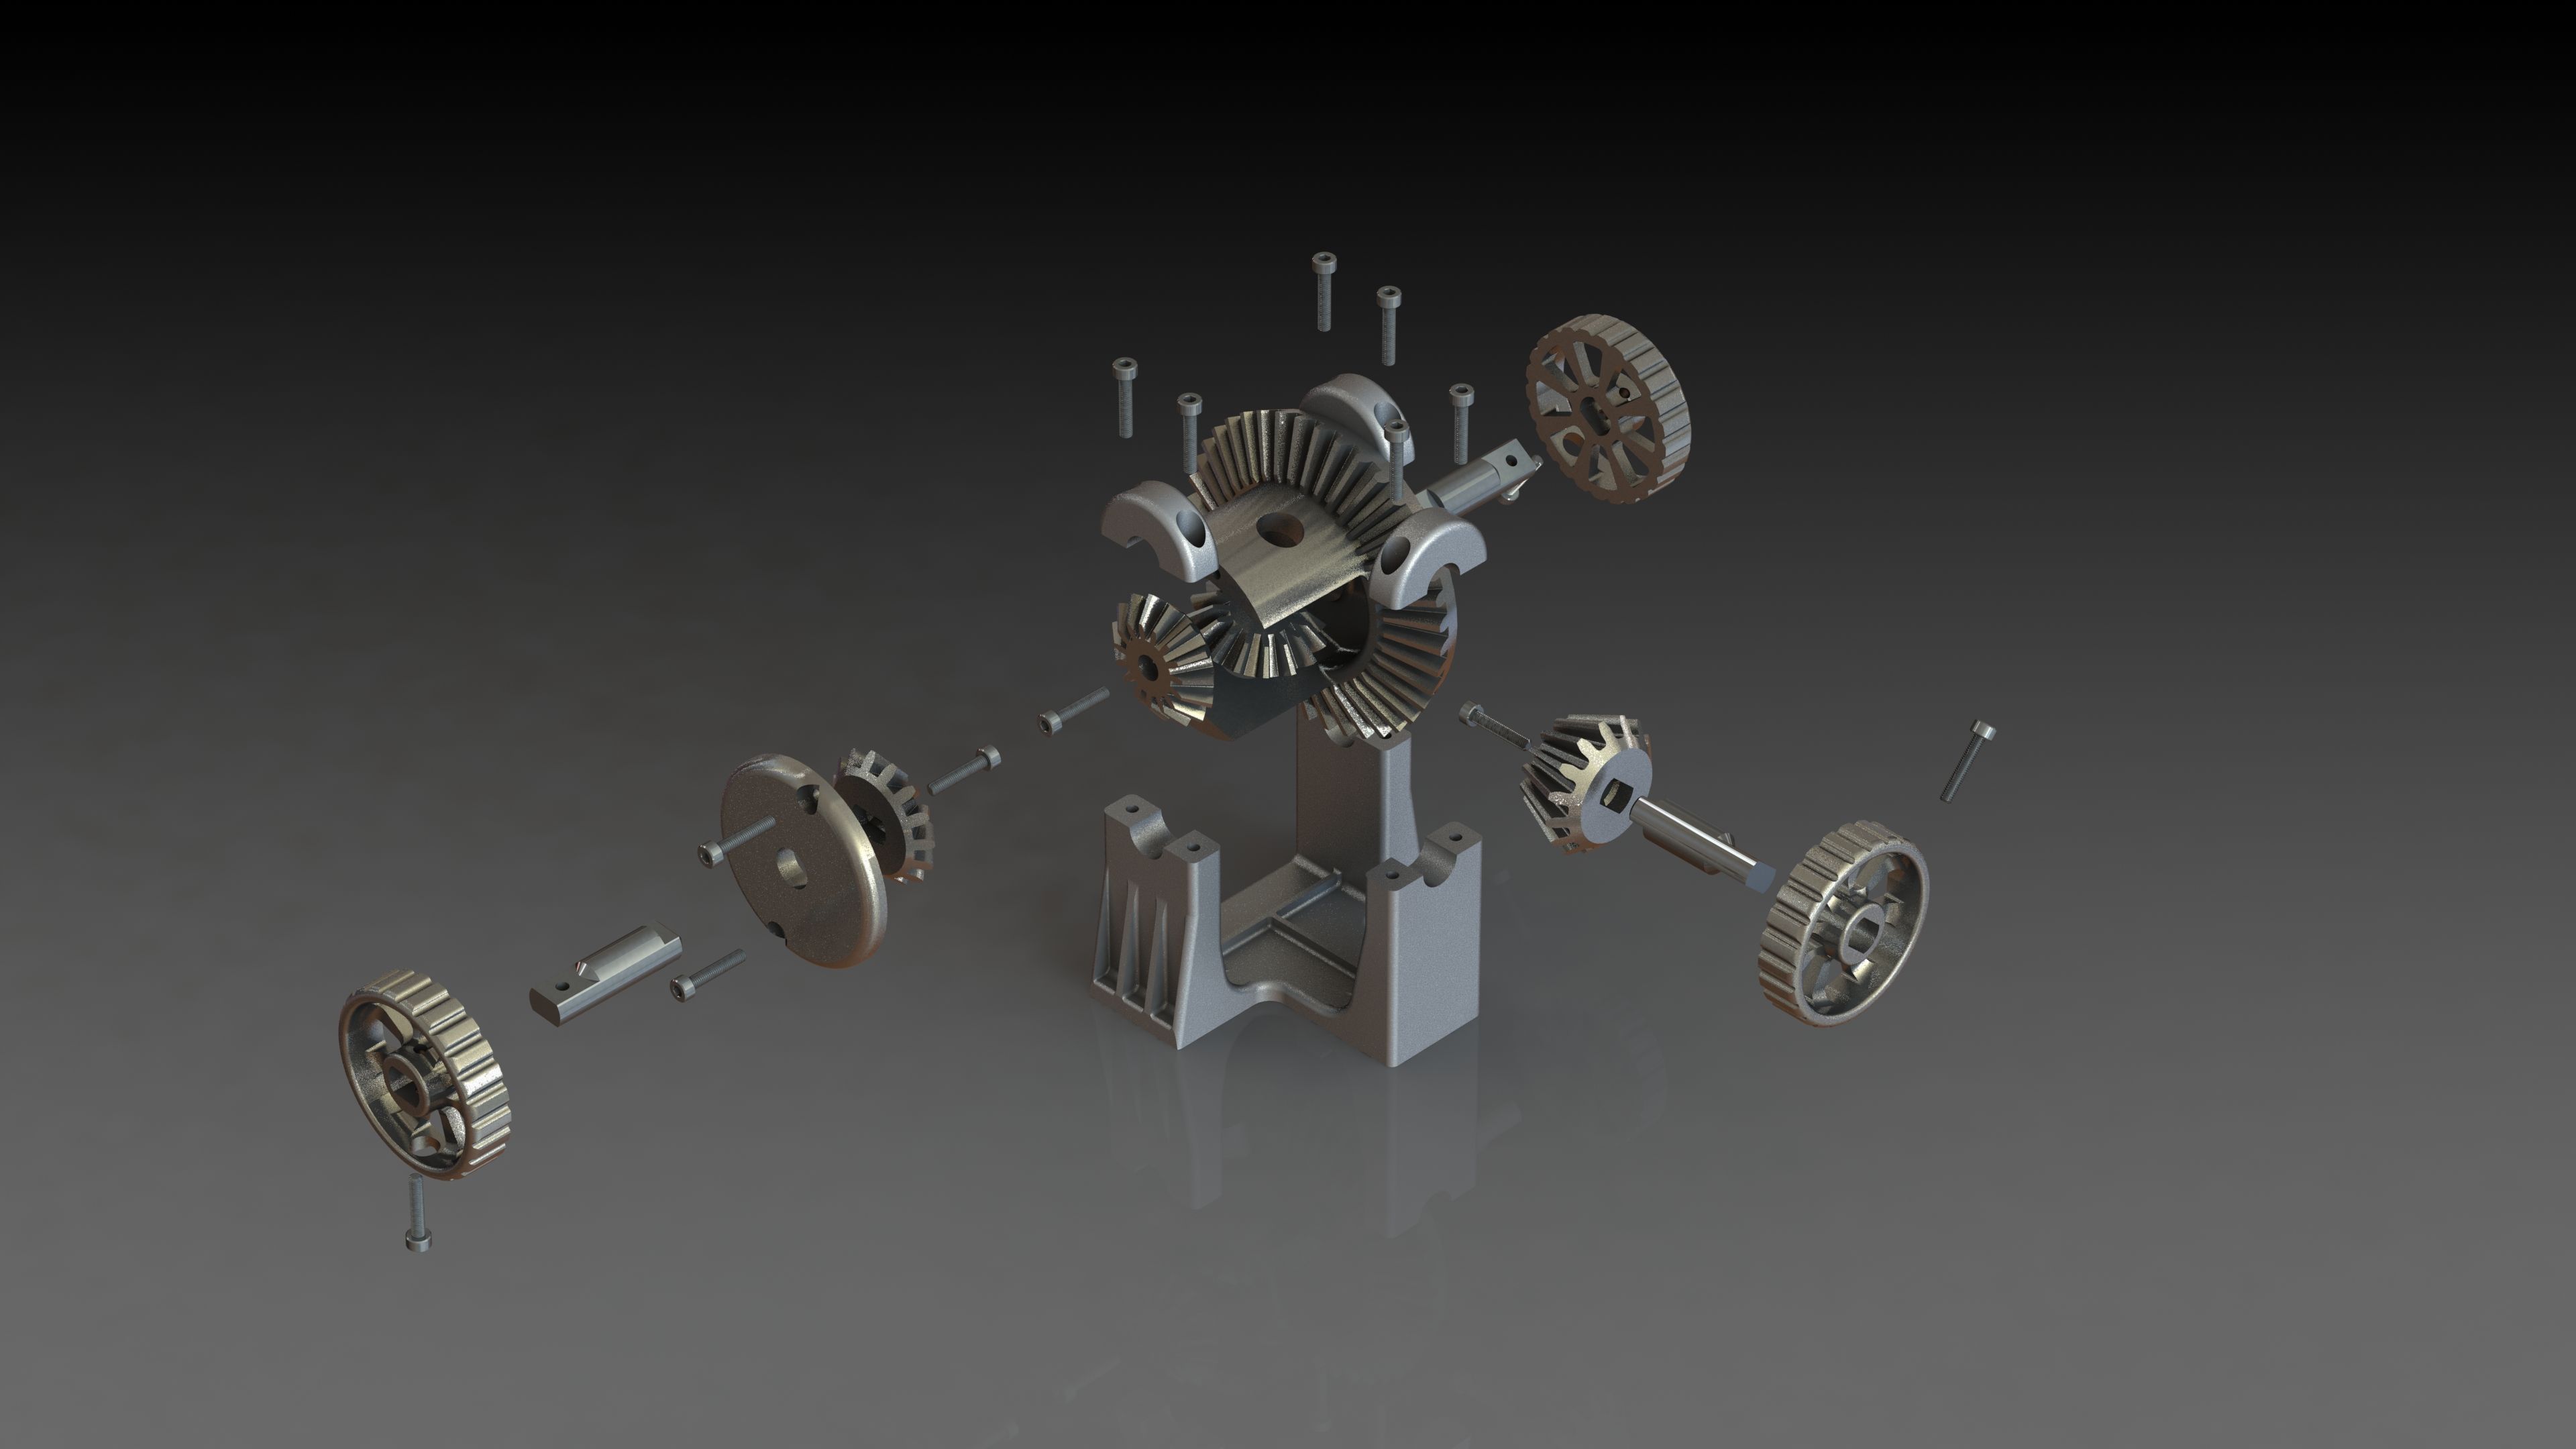 Solidworks Render of a Differential [3840x2160]